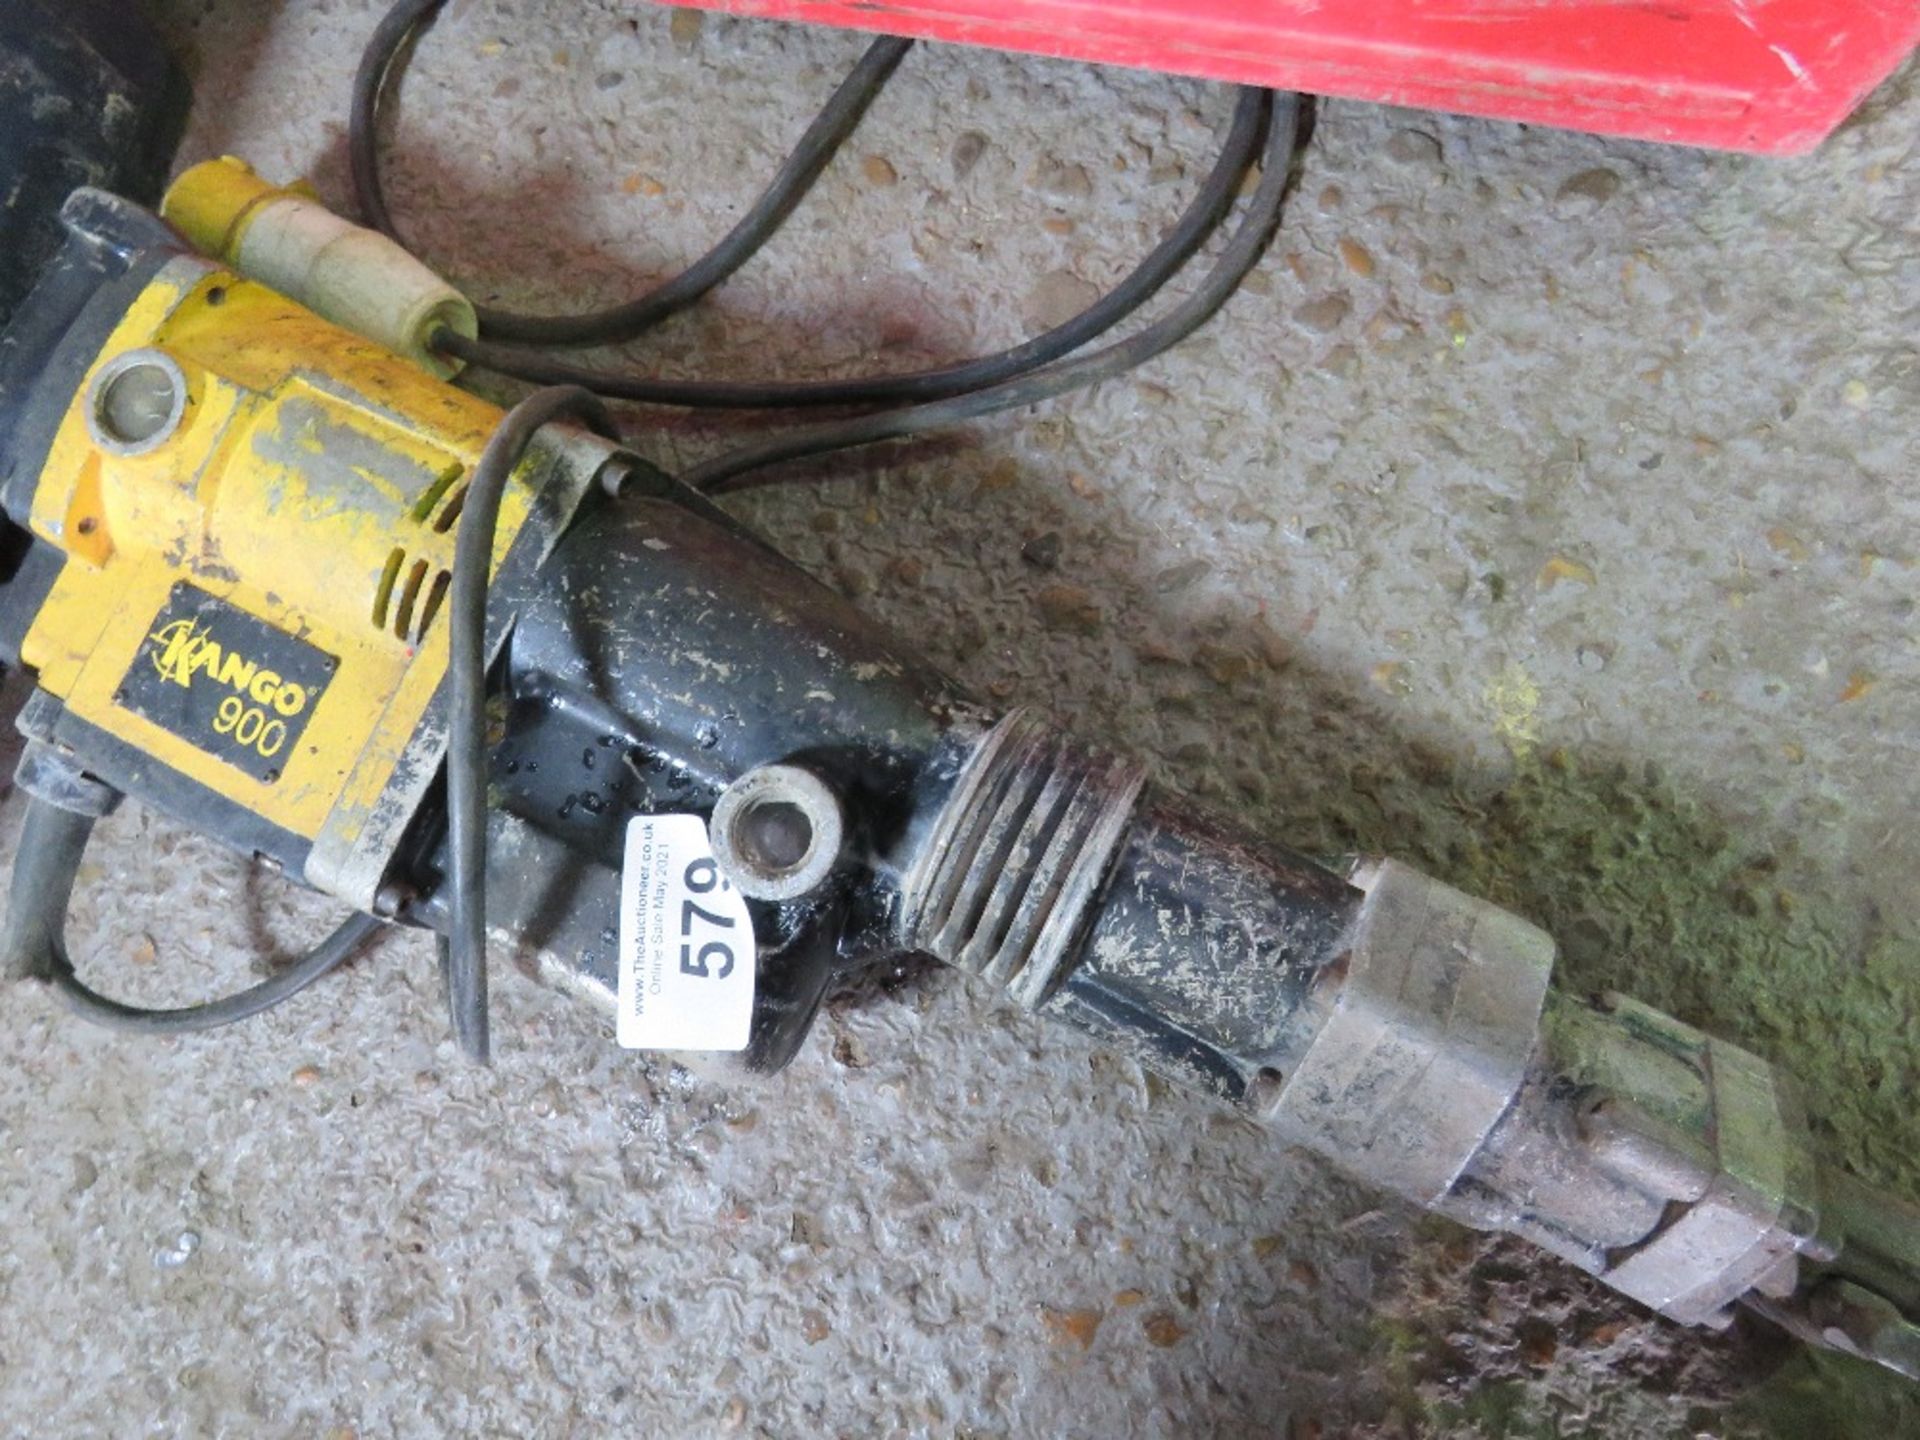 KANGO 900 BREAKER DRILL, 110VOLT POWERED. UNTESTED, CONDITION UNKNOWN.